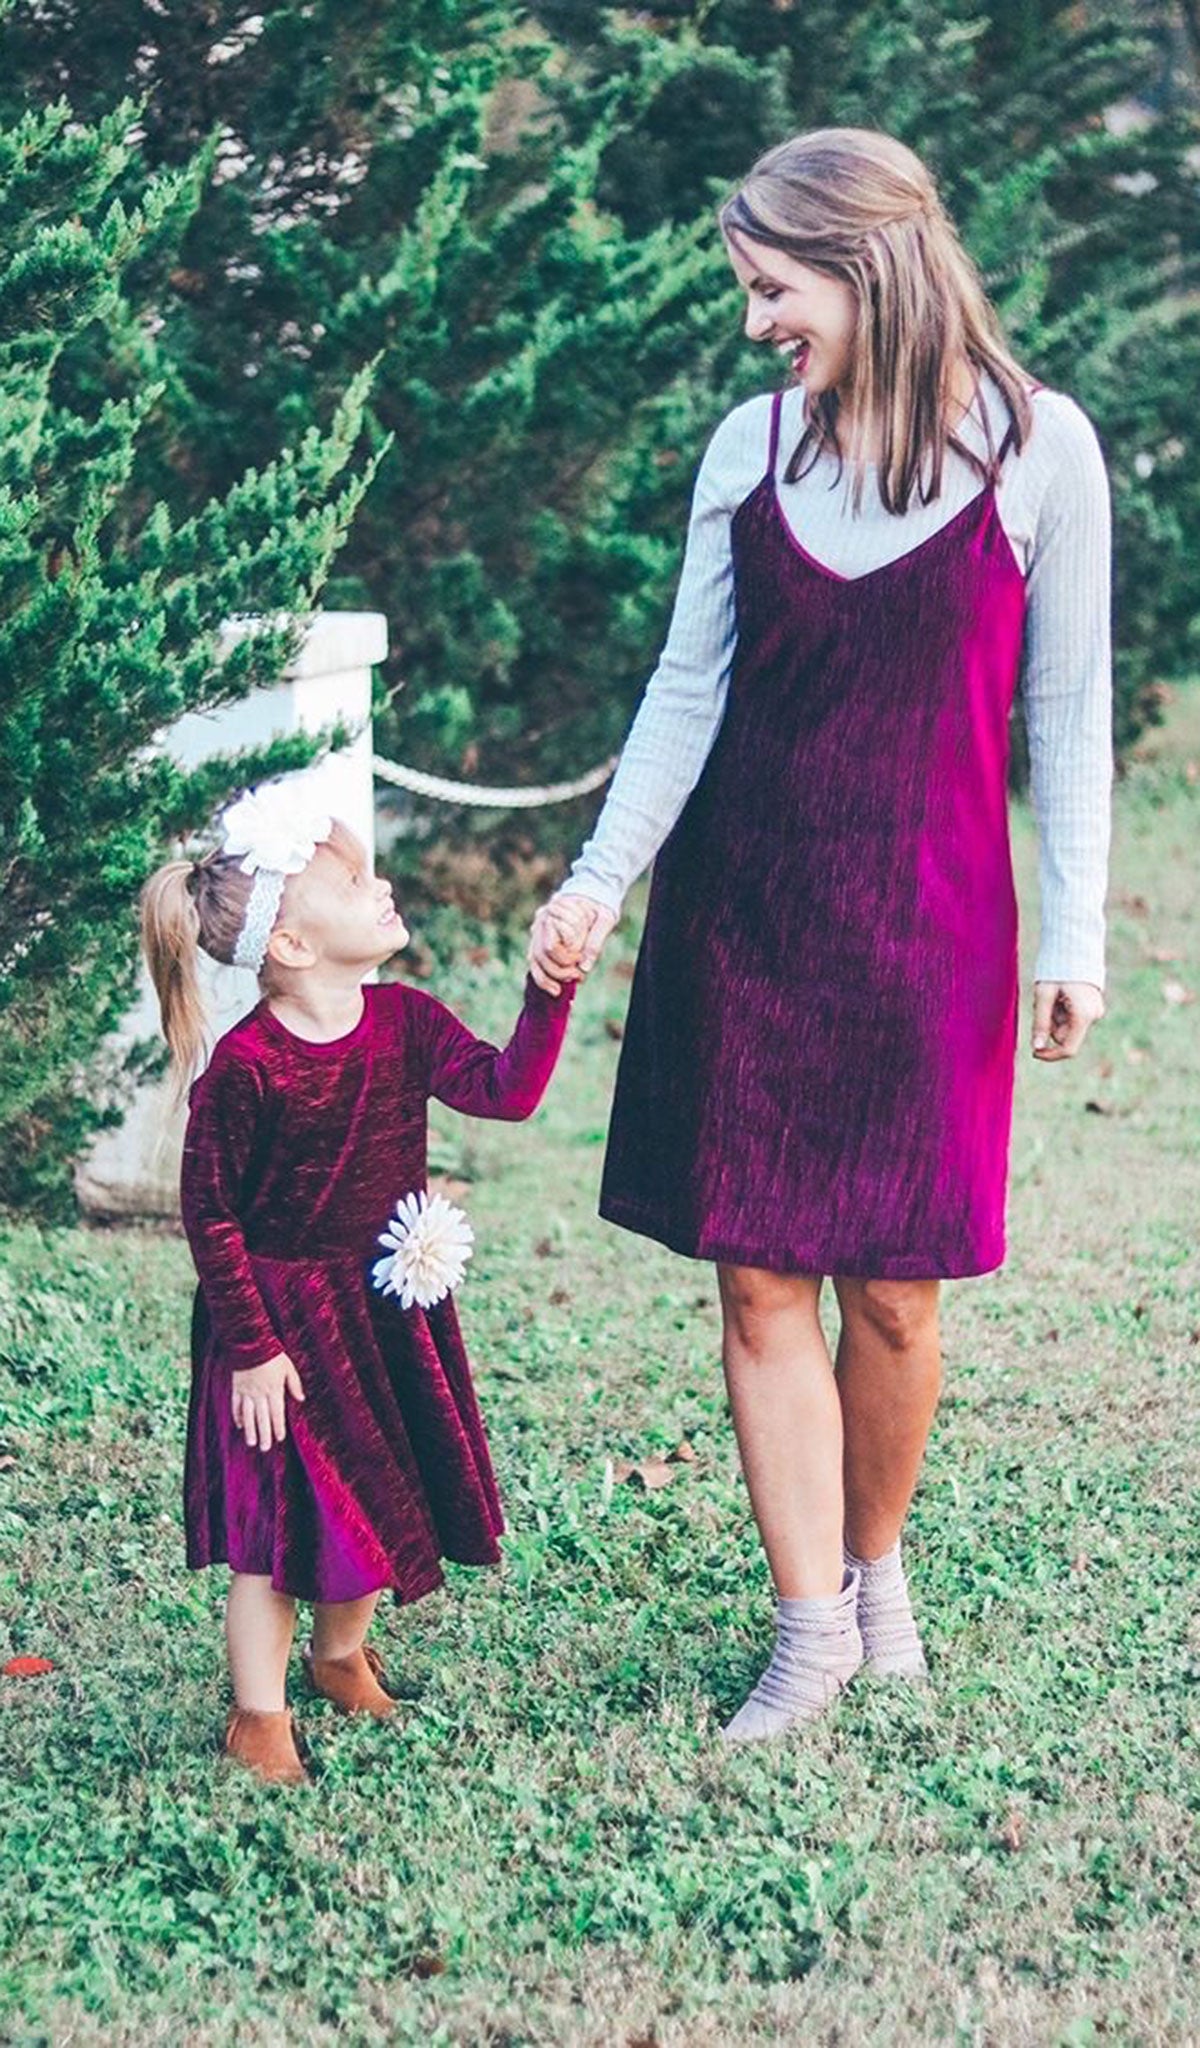 Merlot Aurora dress worn by woman with Cristiano long sleeve oatmeal top layered underneath, holding hands with a little girl wearing matching Kendyl Dress.